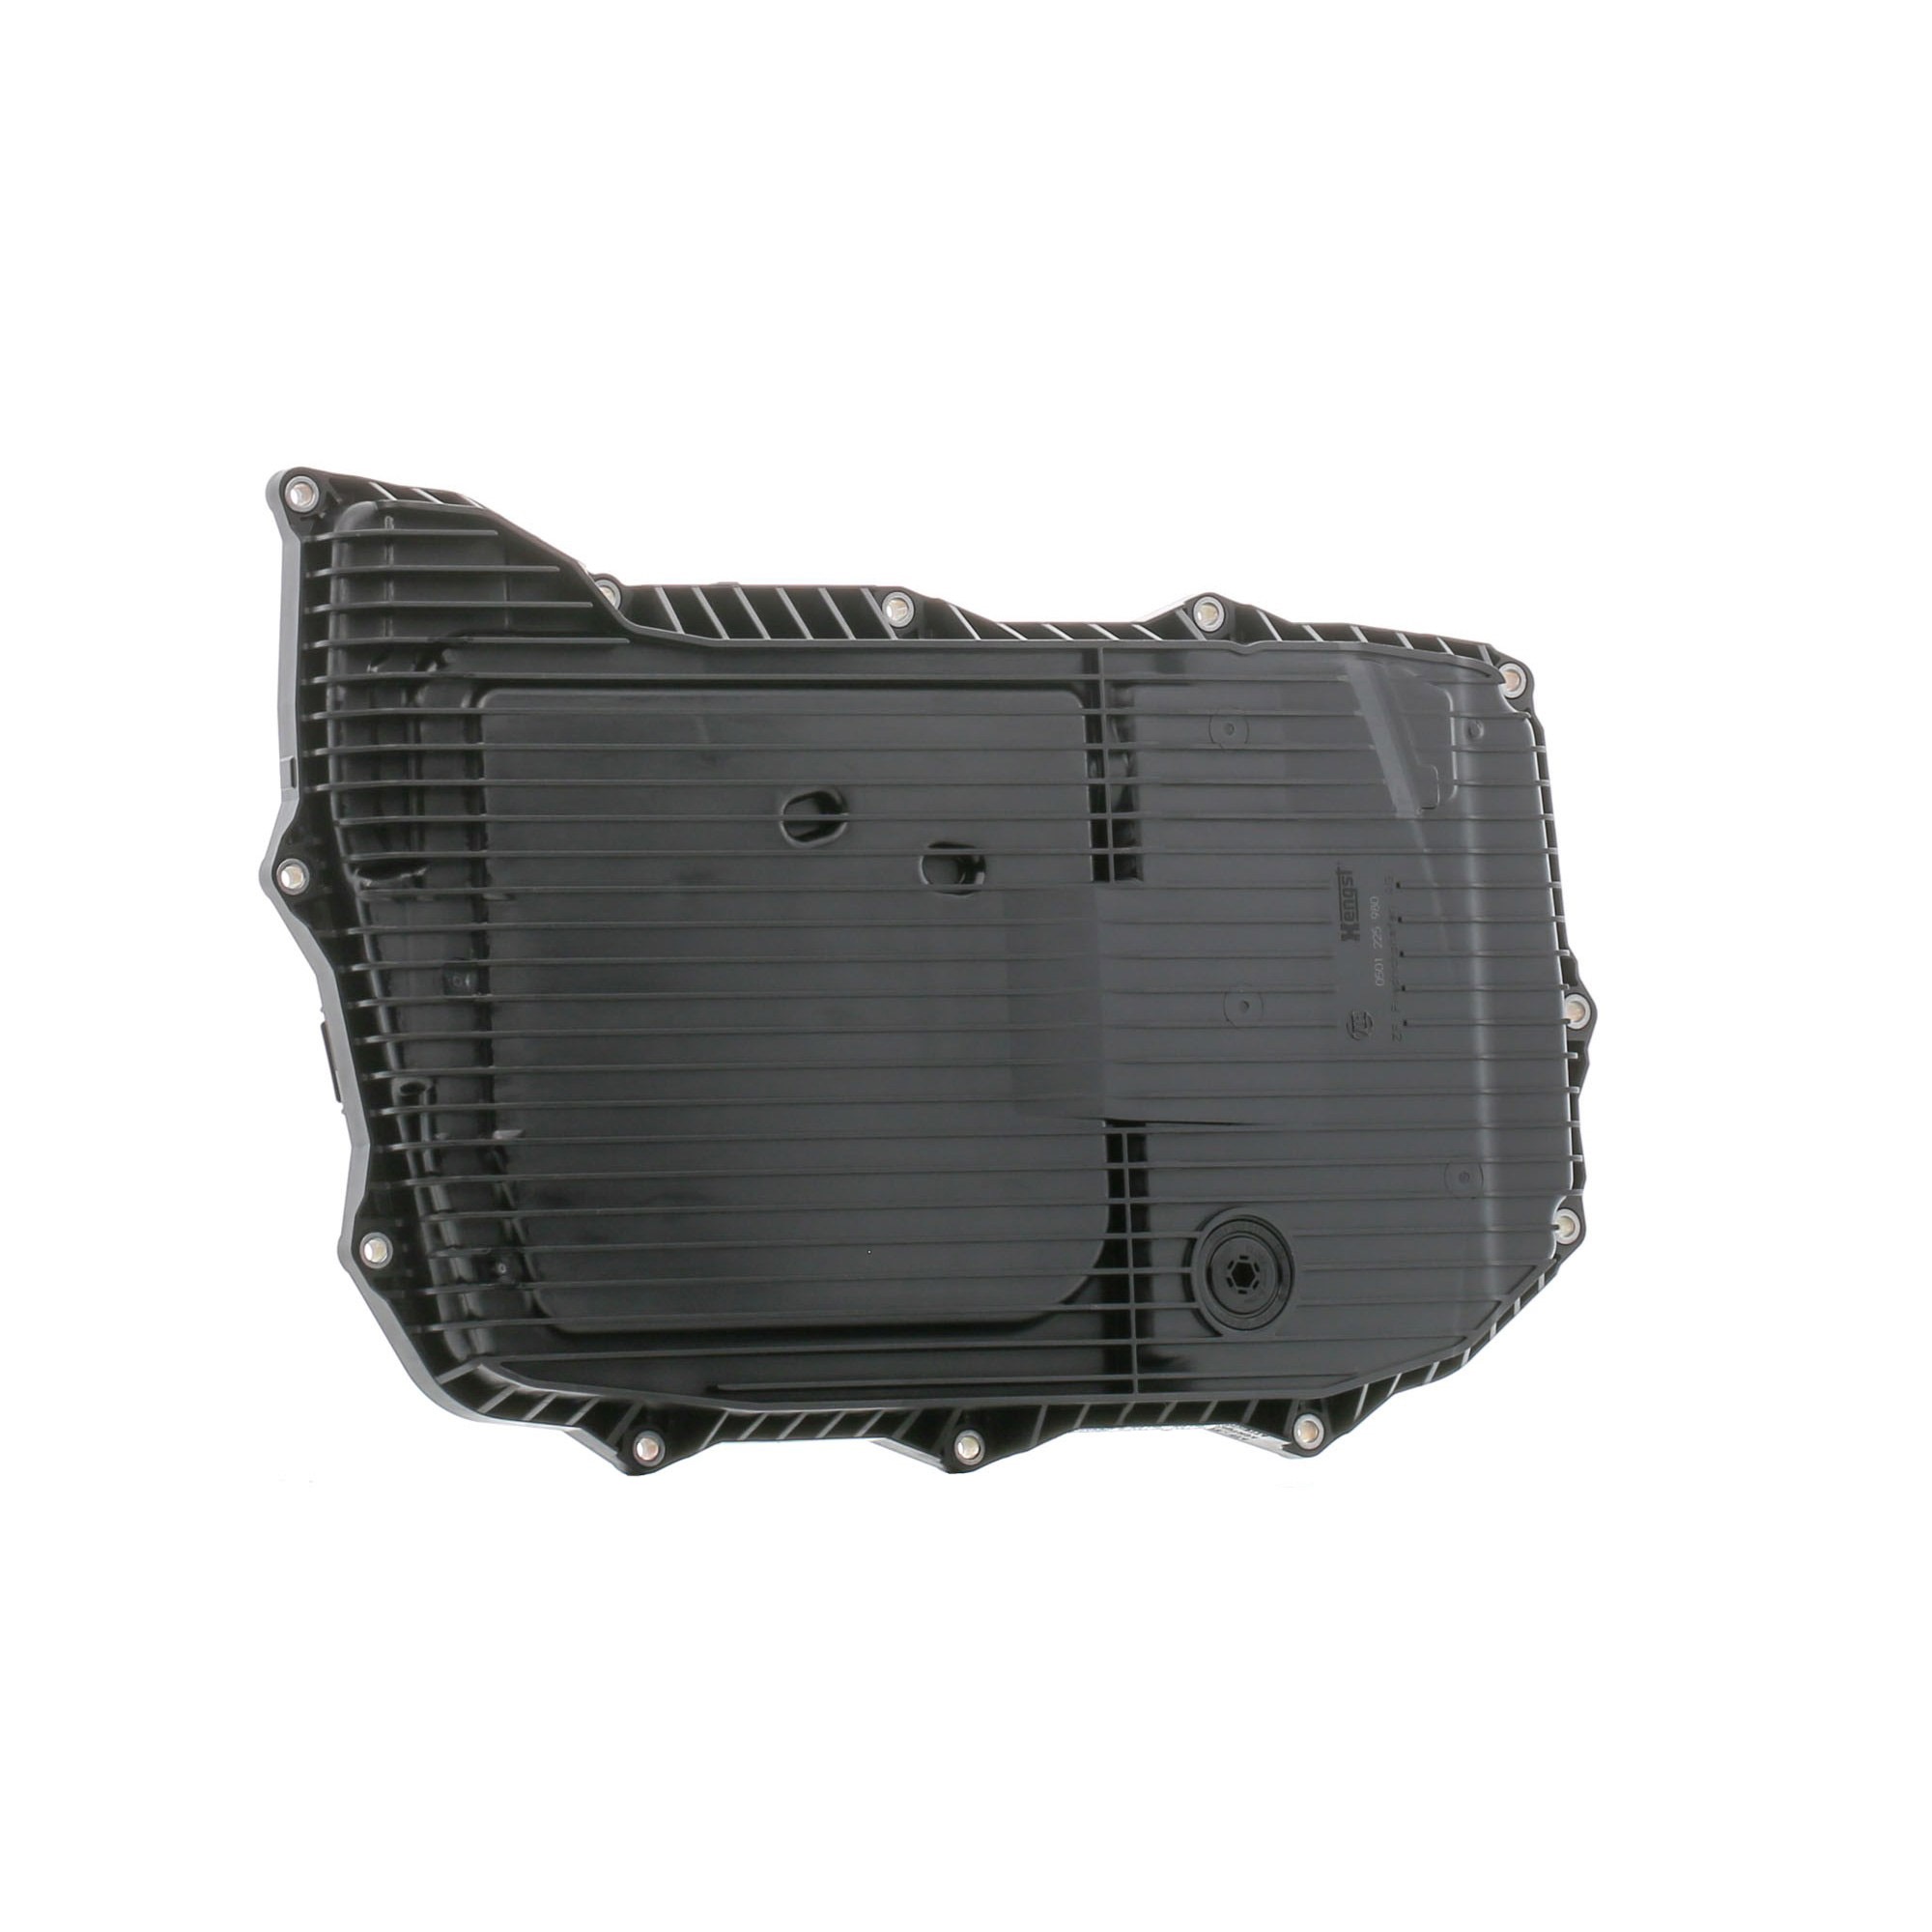 ZF GETRIEBE 1103.298.006 Automatic transmission filter AUDI A6 C8 Allroad (4AH)